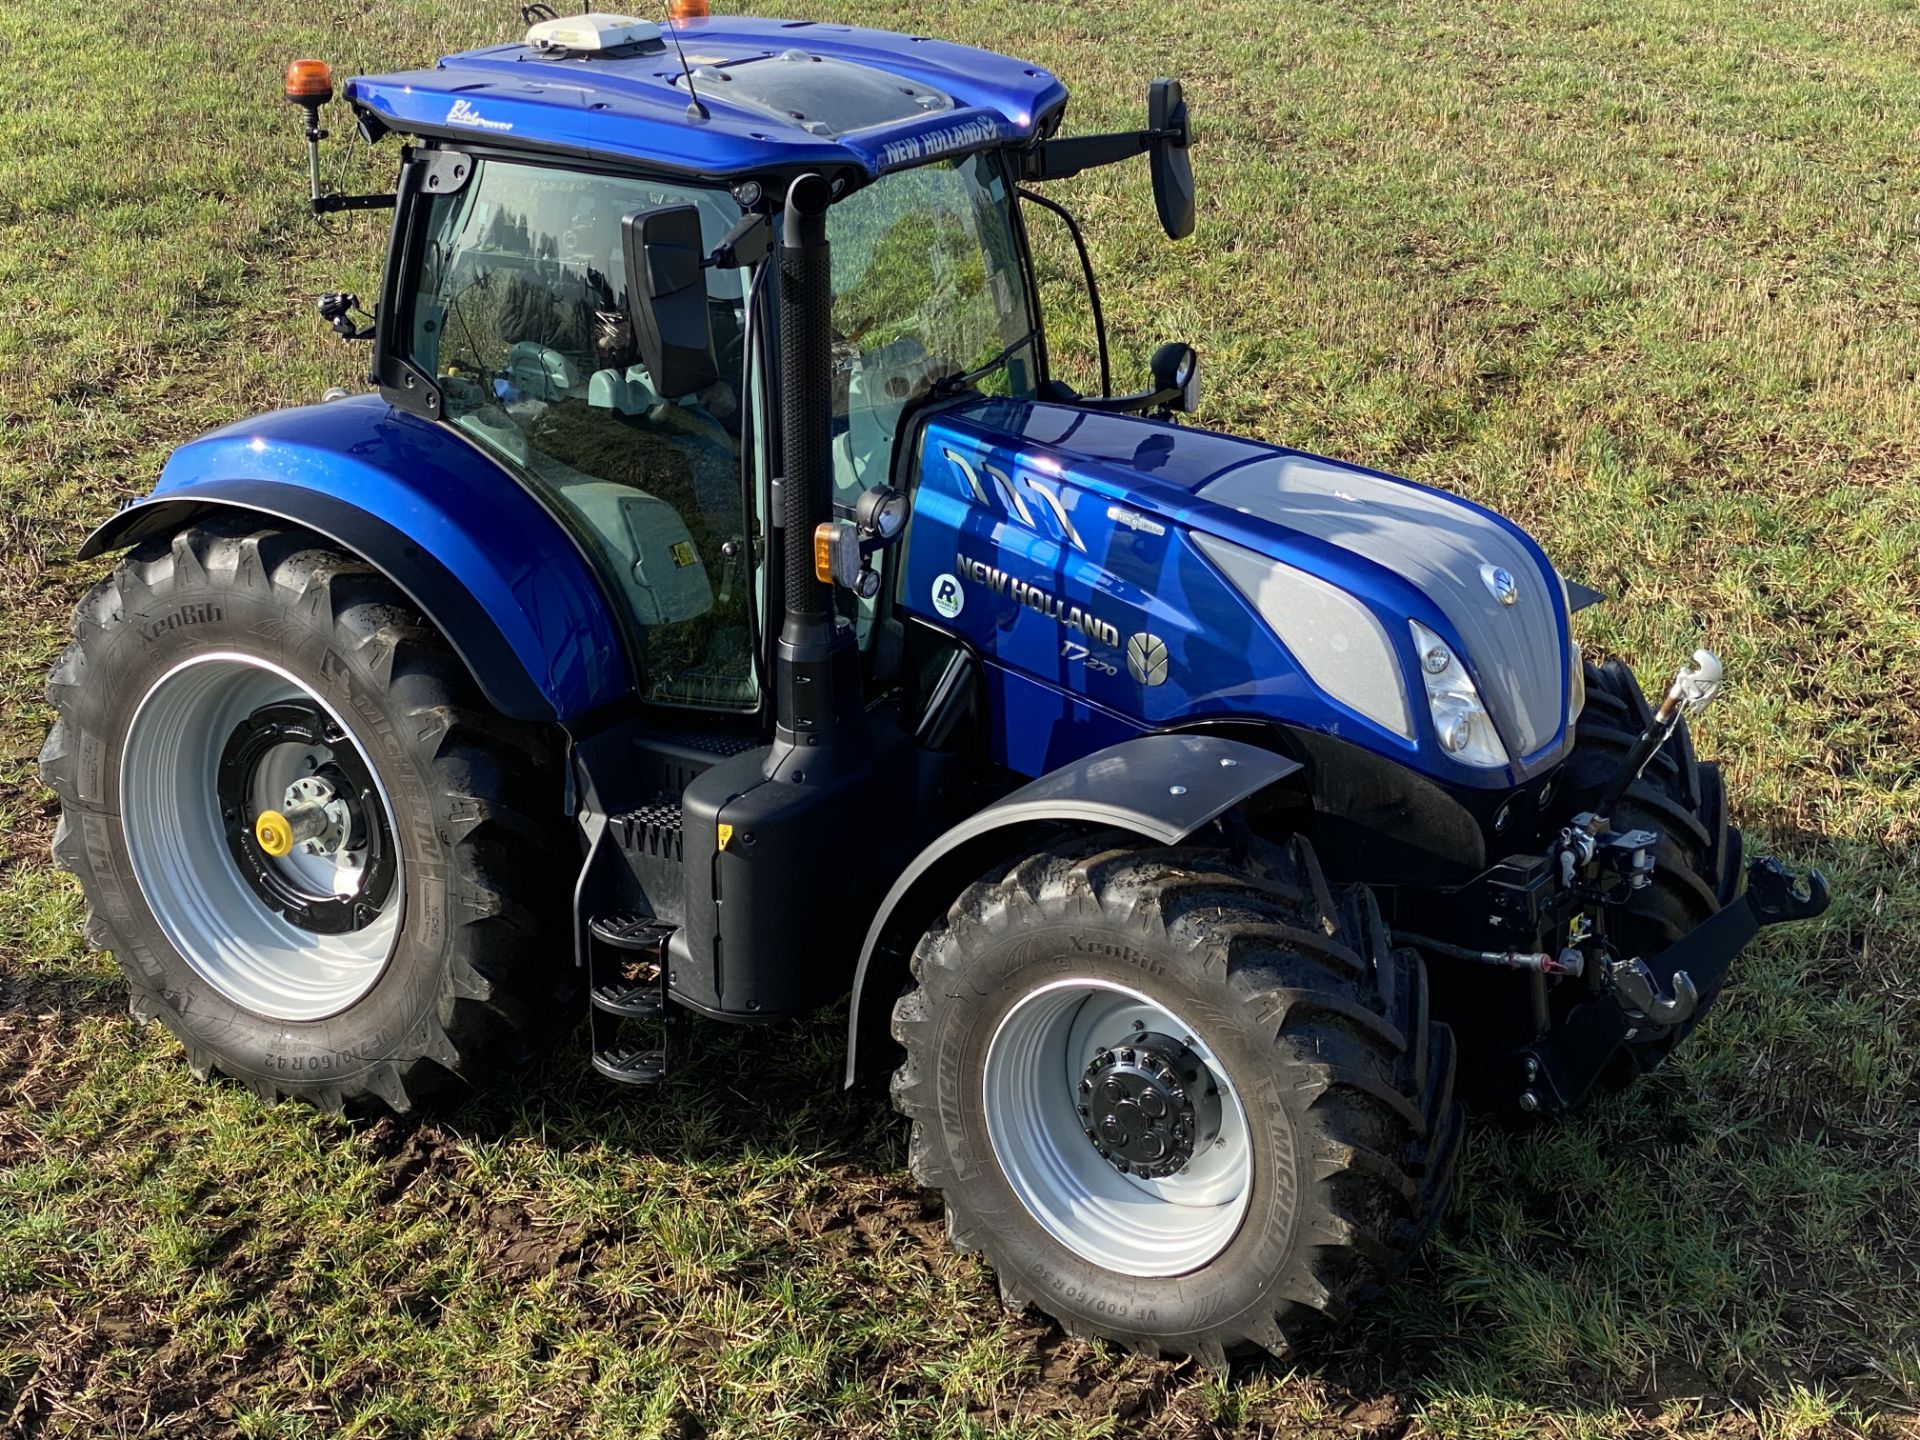 2021 New Holland T7.270 "Blue Power" Aut - Image 8 of 8